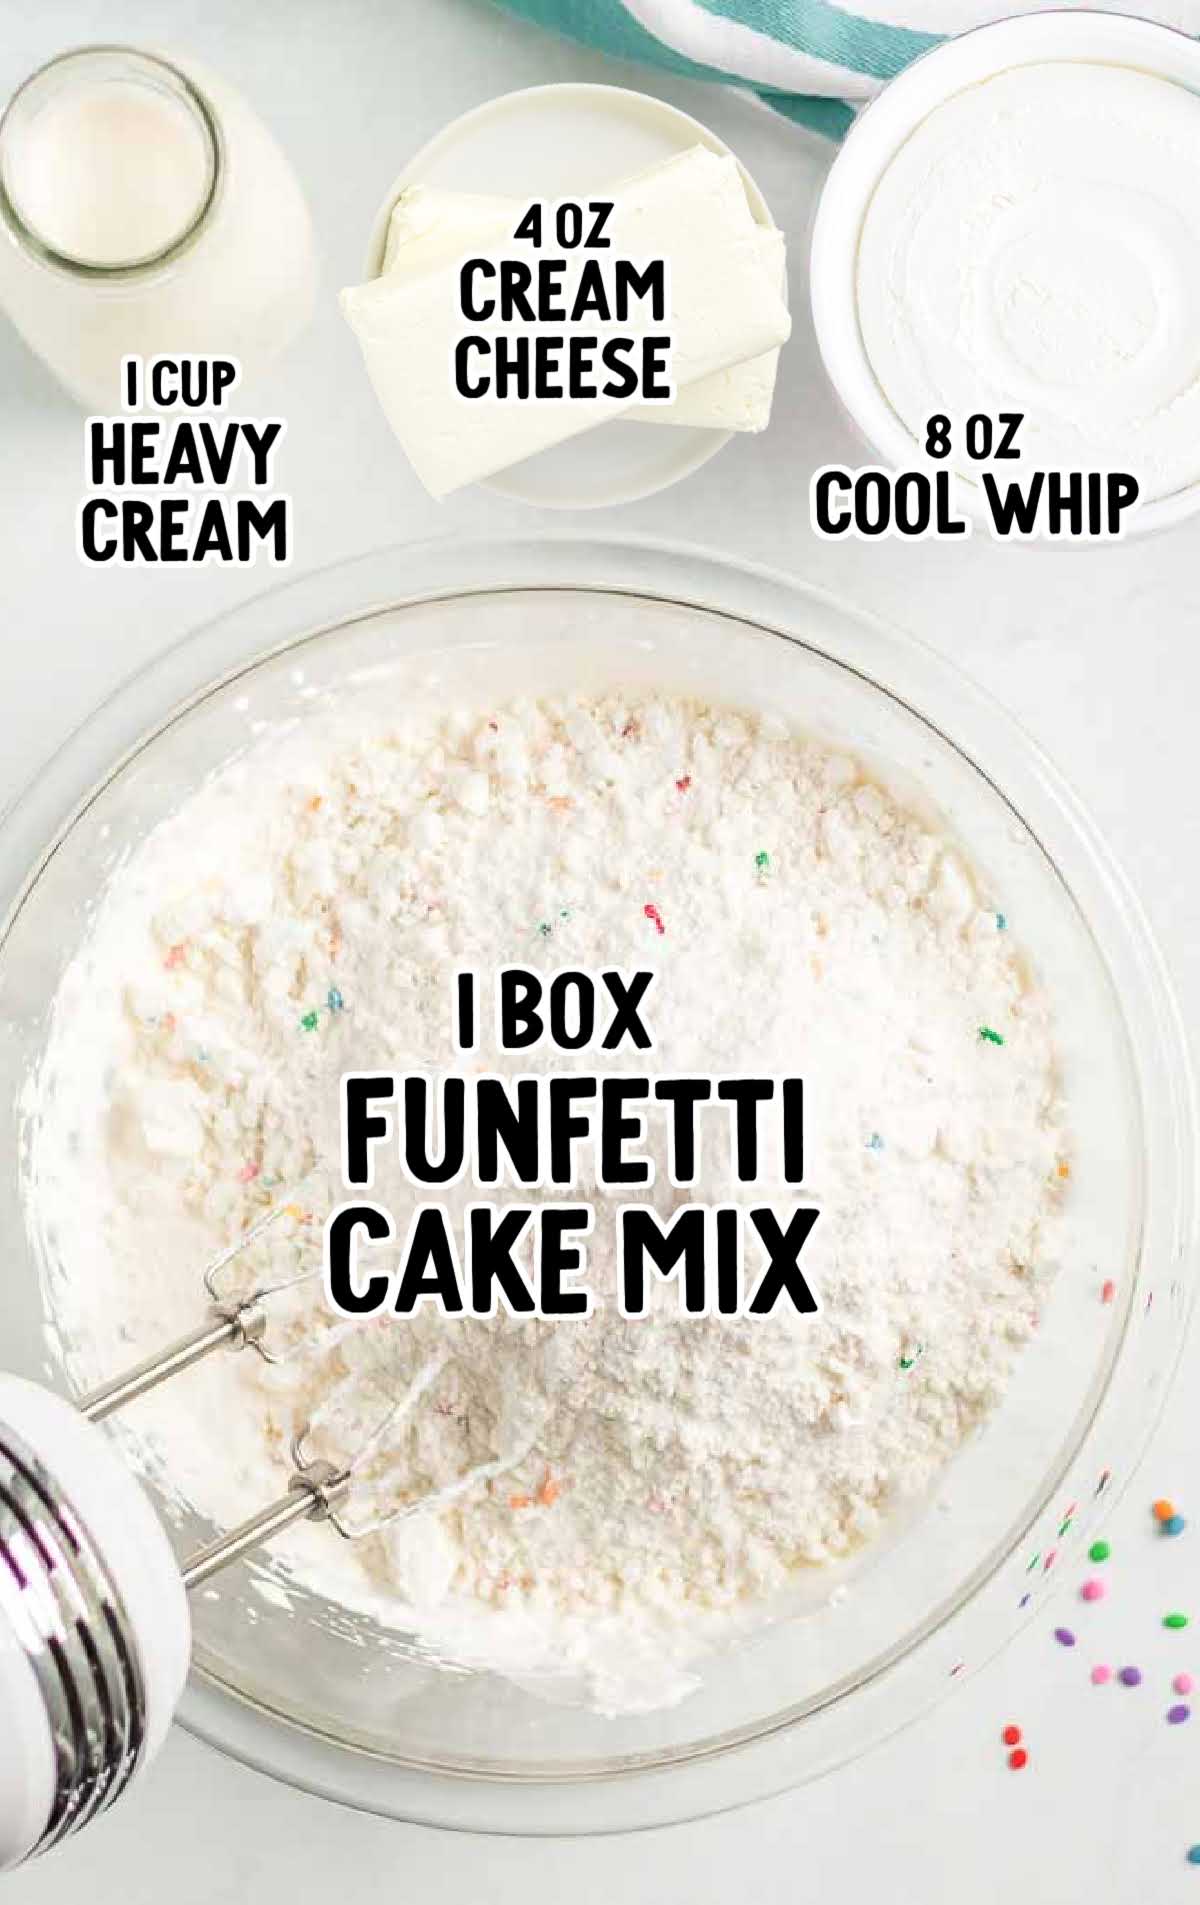 Funfetti Dip raw ingredients that are labeled